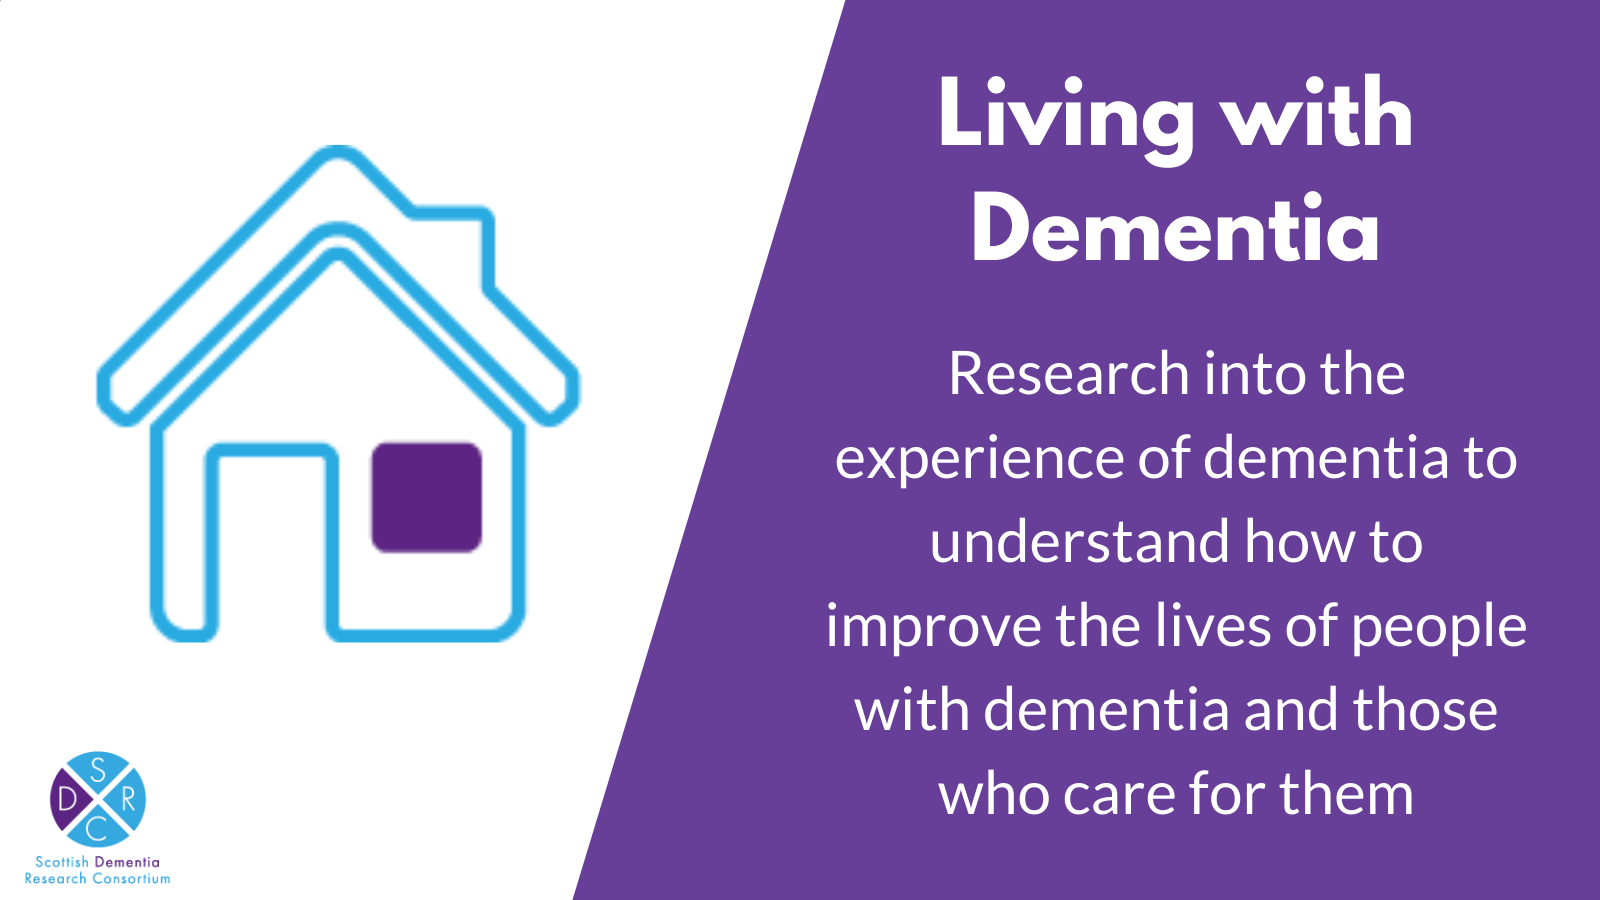 SDRC Annual Report 2022/23: Living with Dementia